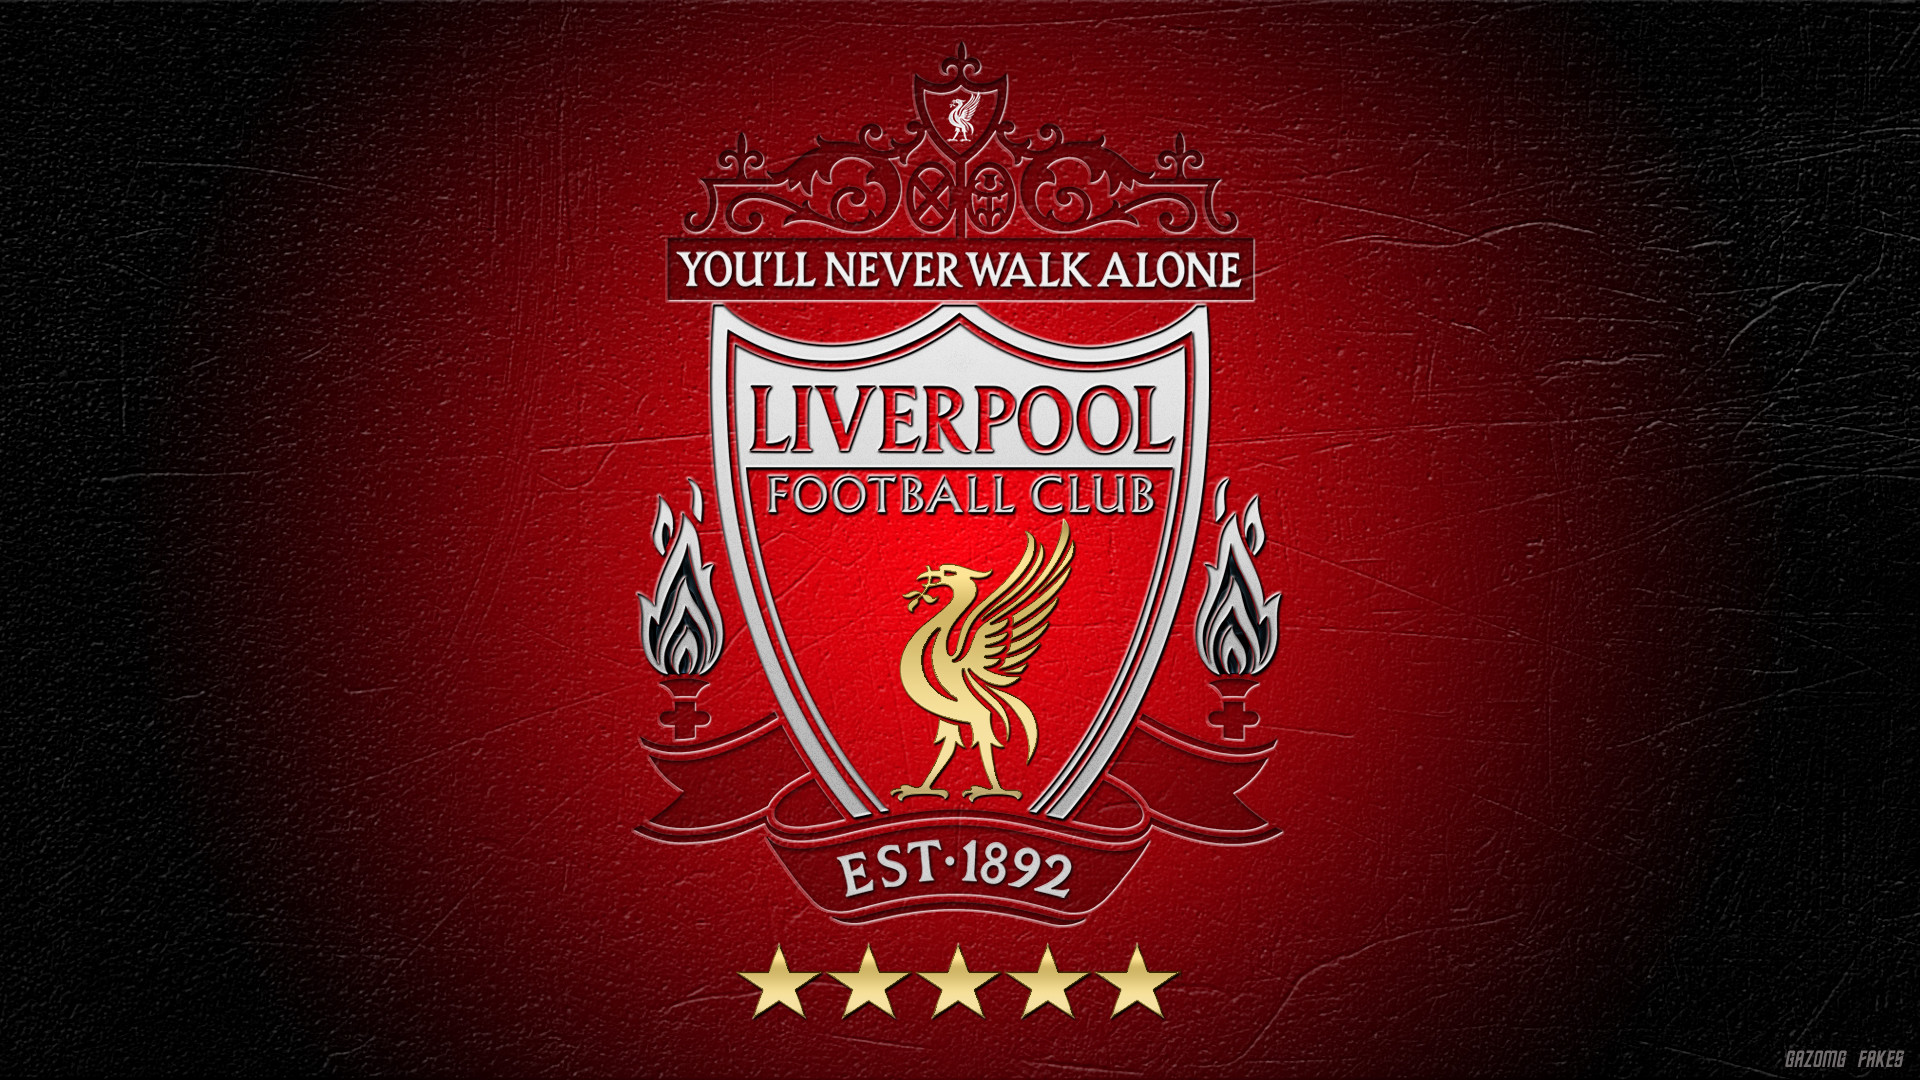  Lfc Desktop Wallpaper of all time Learn more here 